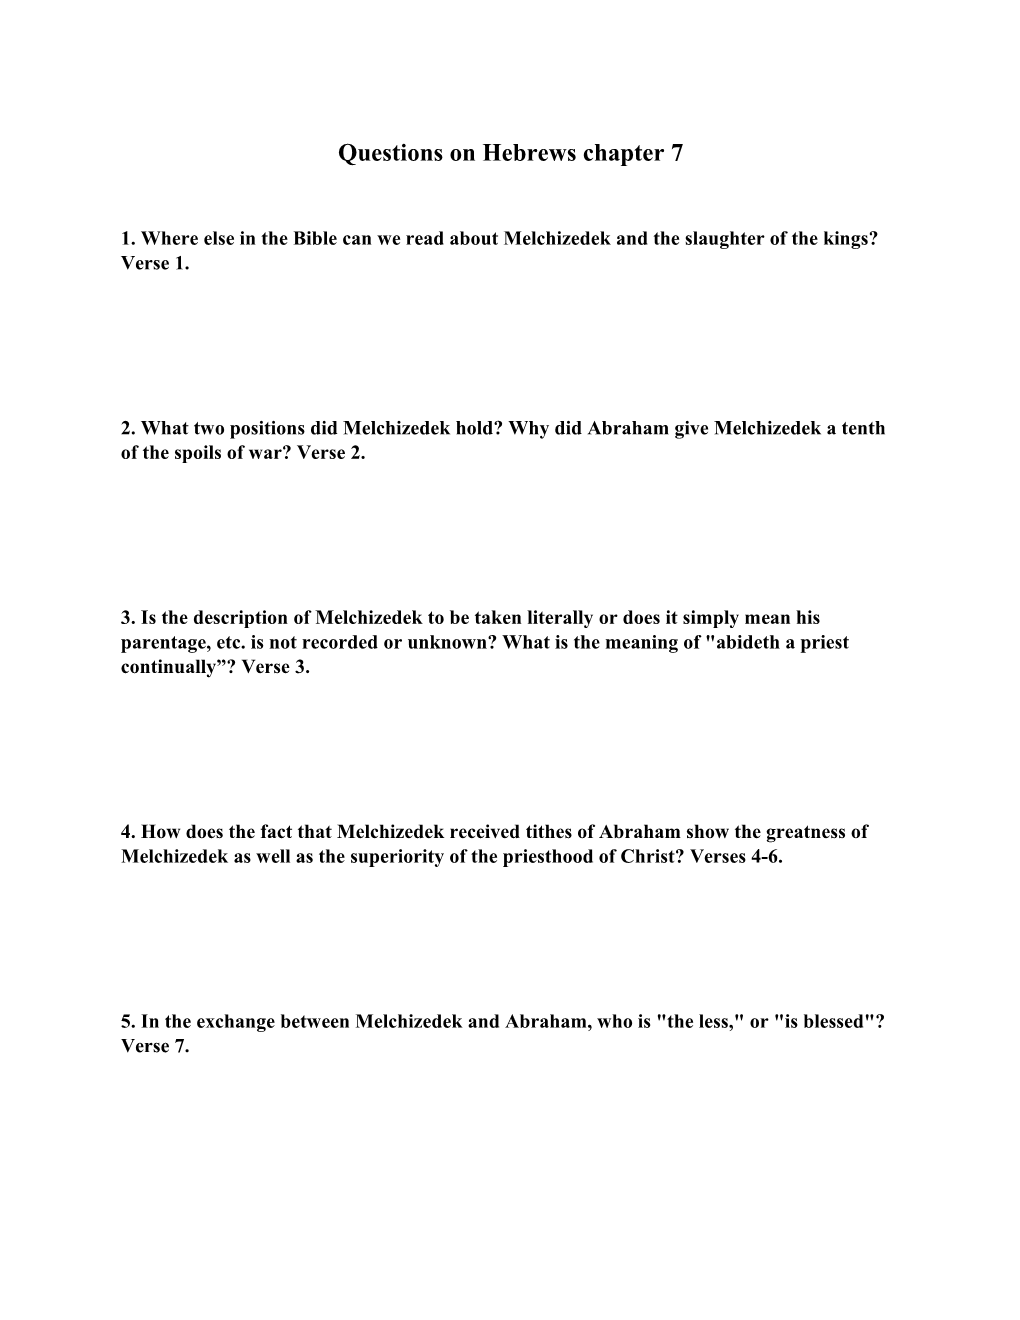 Questions on Hebrews Chapter 7